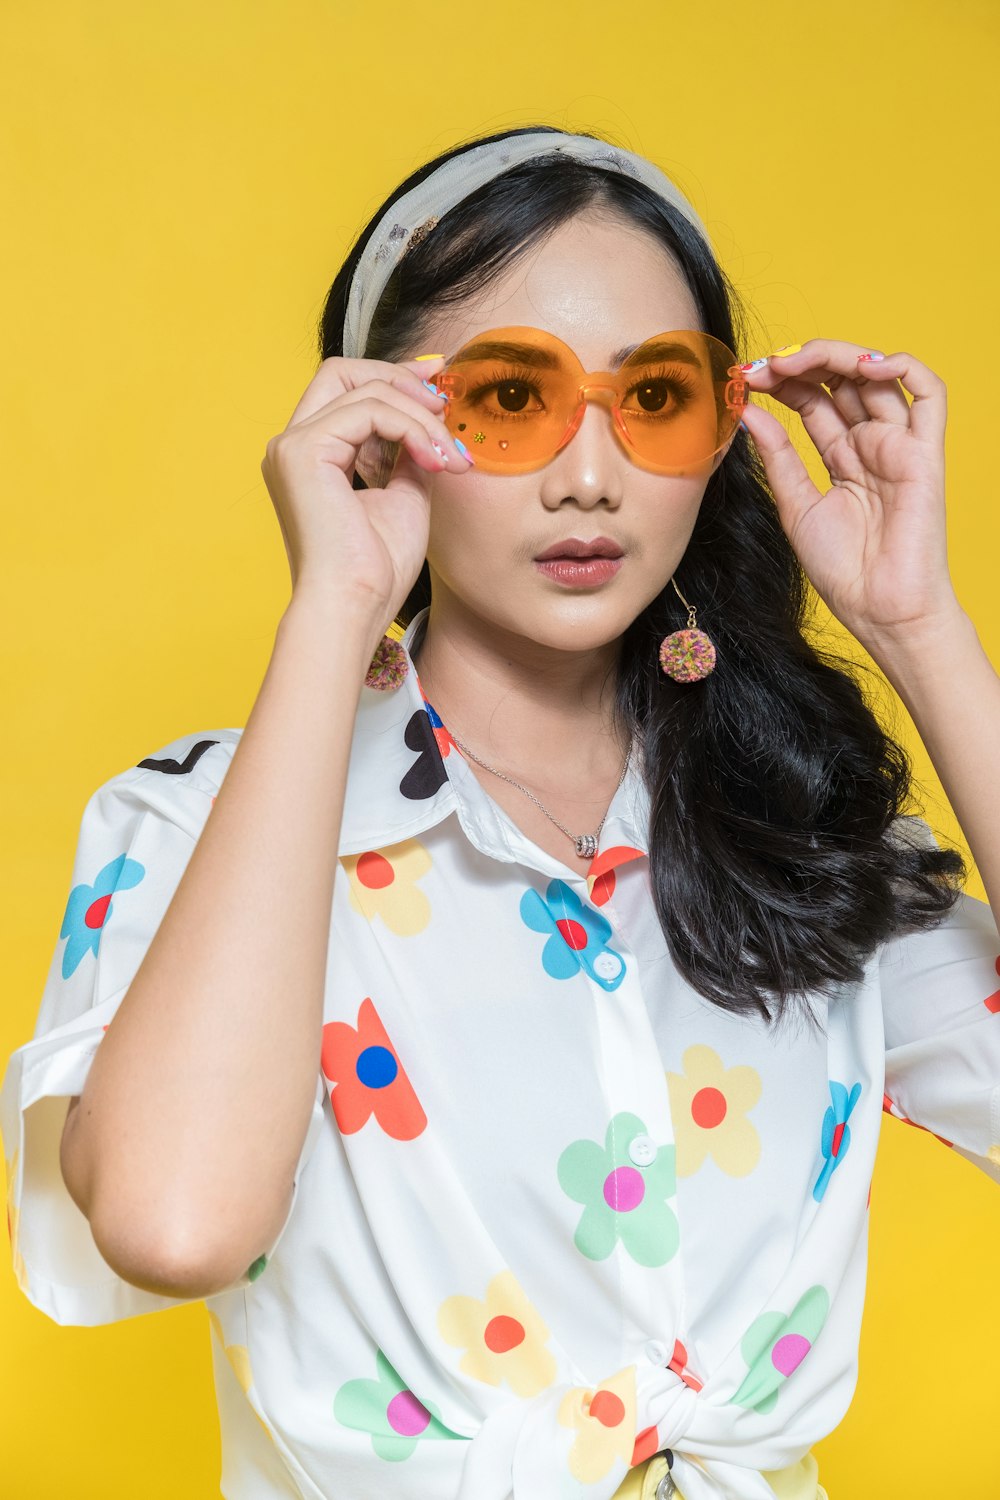 a woman in a polka dot shirt is holding up her glasses